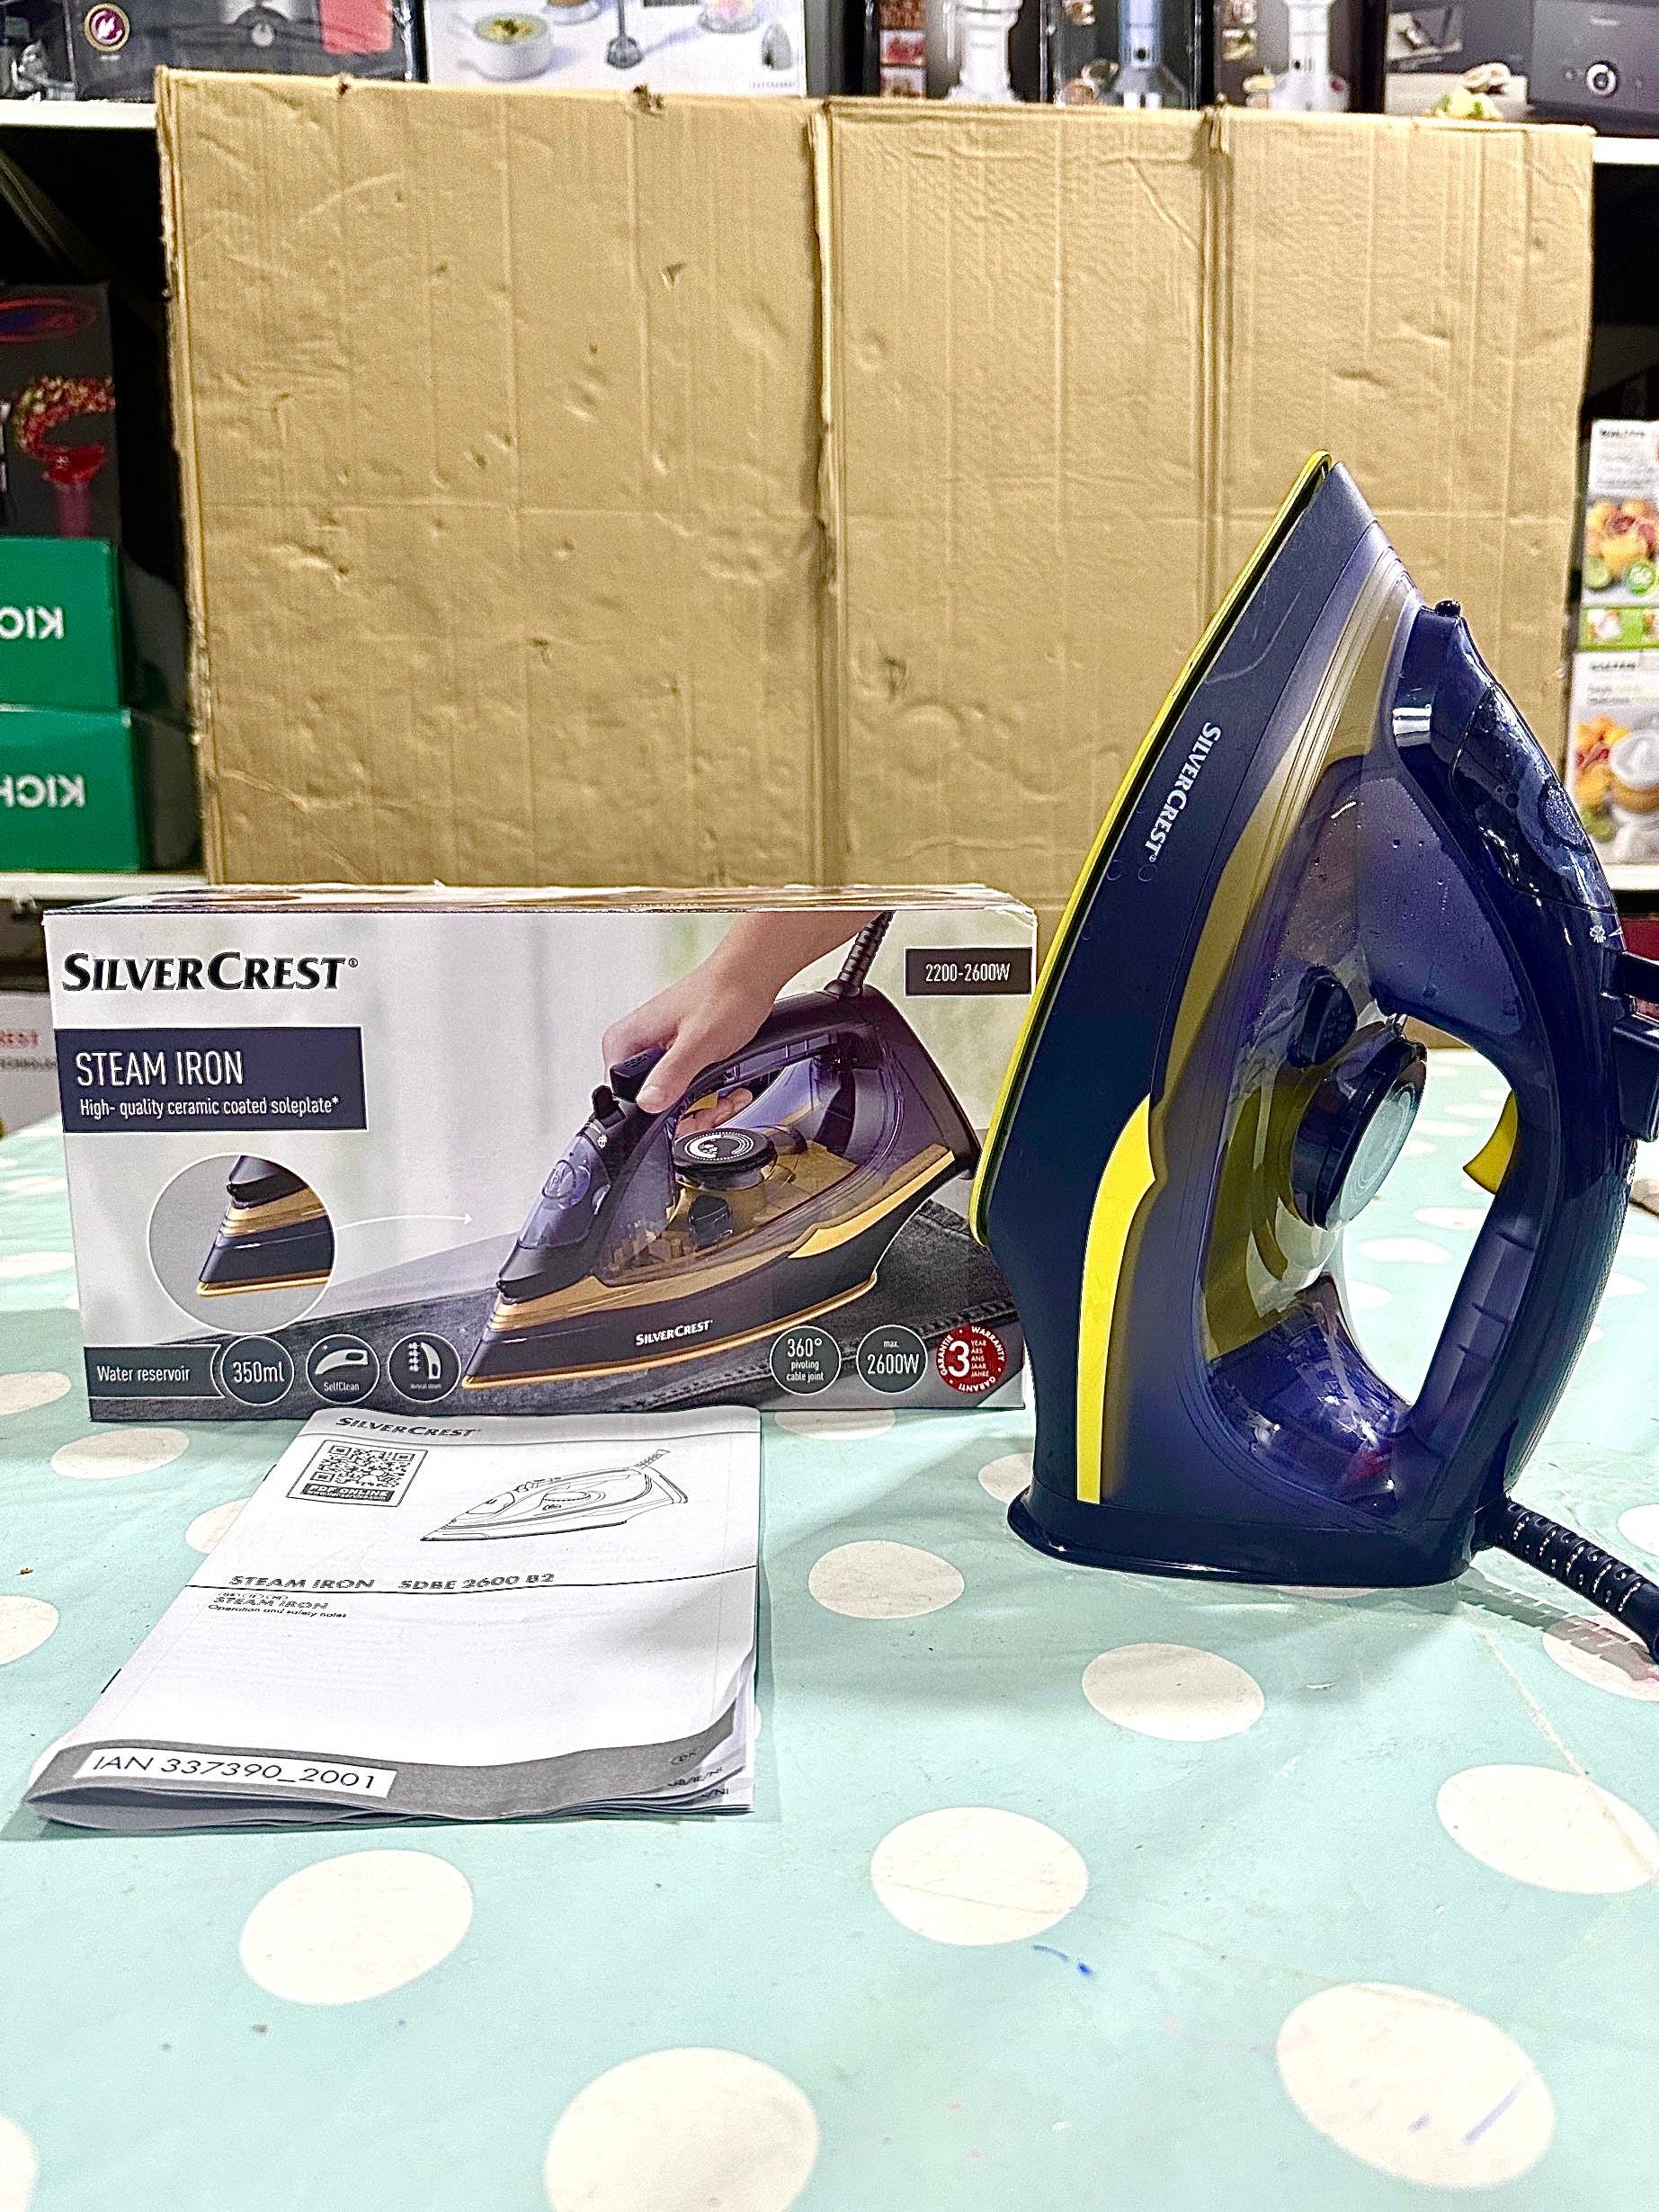 GERMAN lot imported Silver Crest Steam Iron